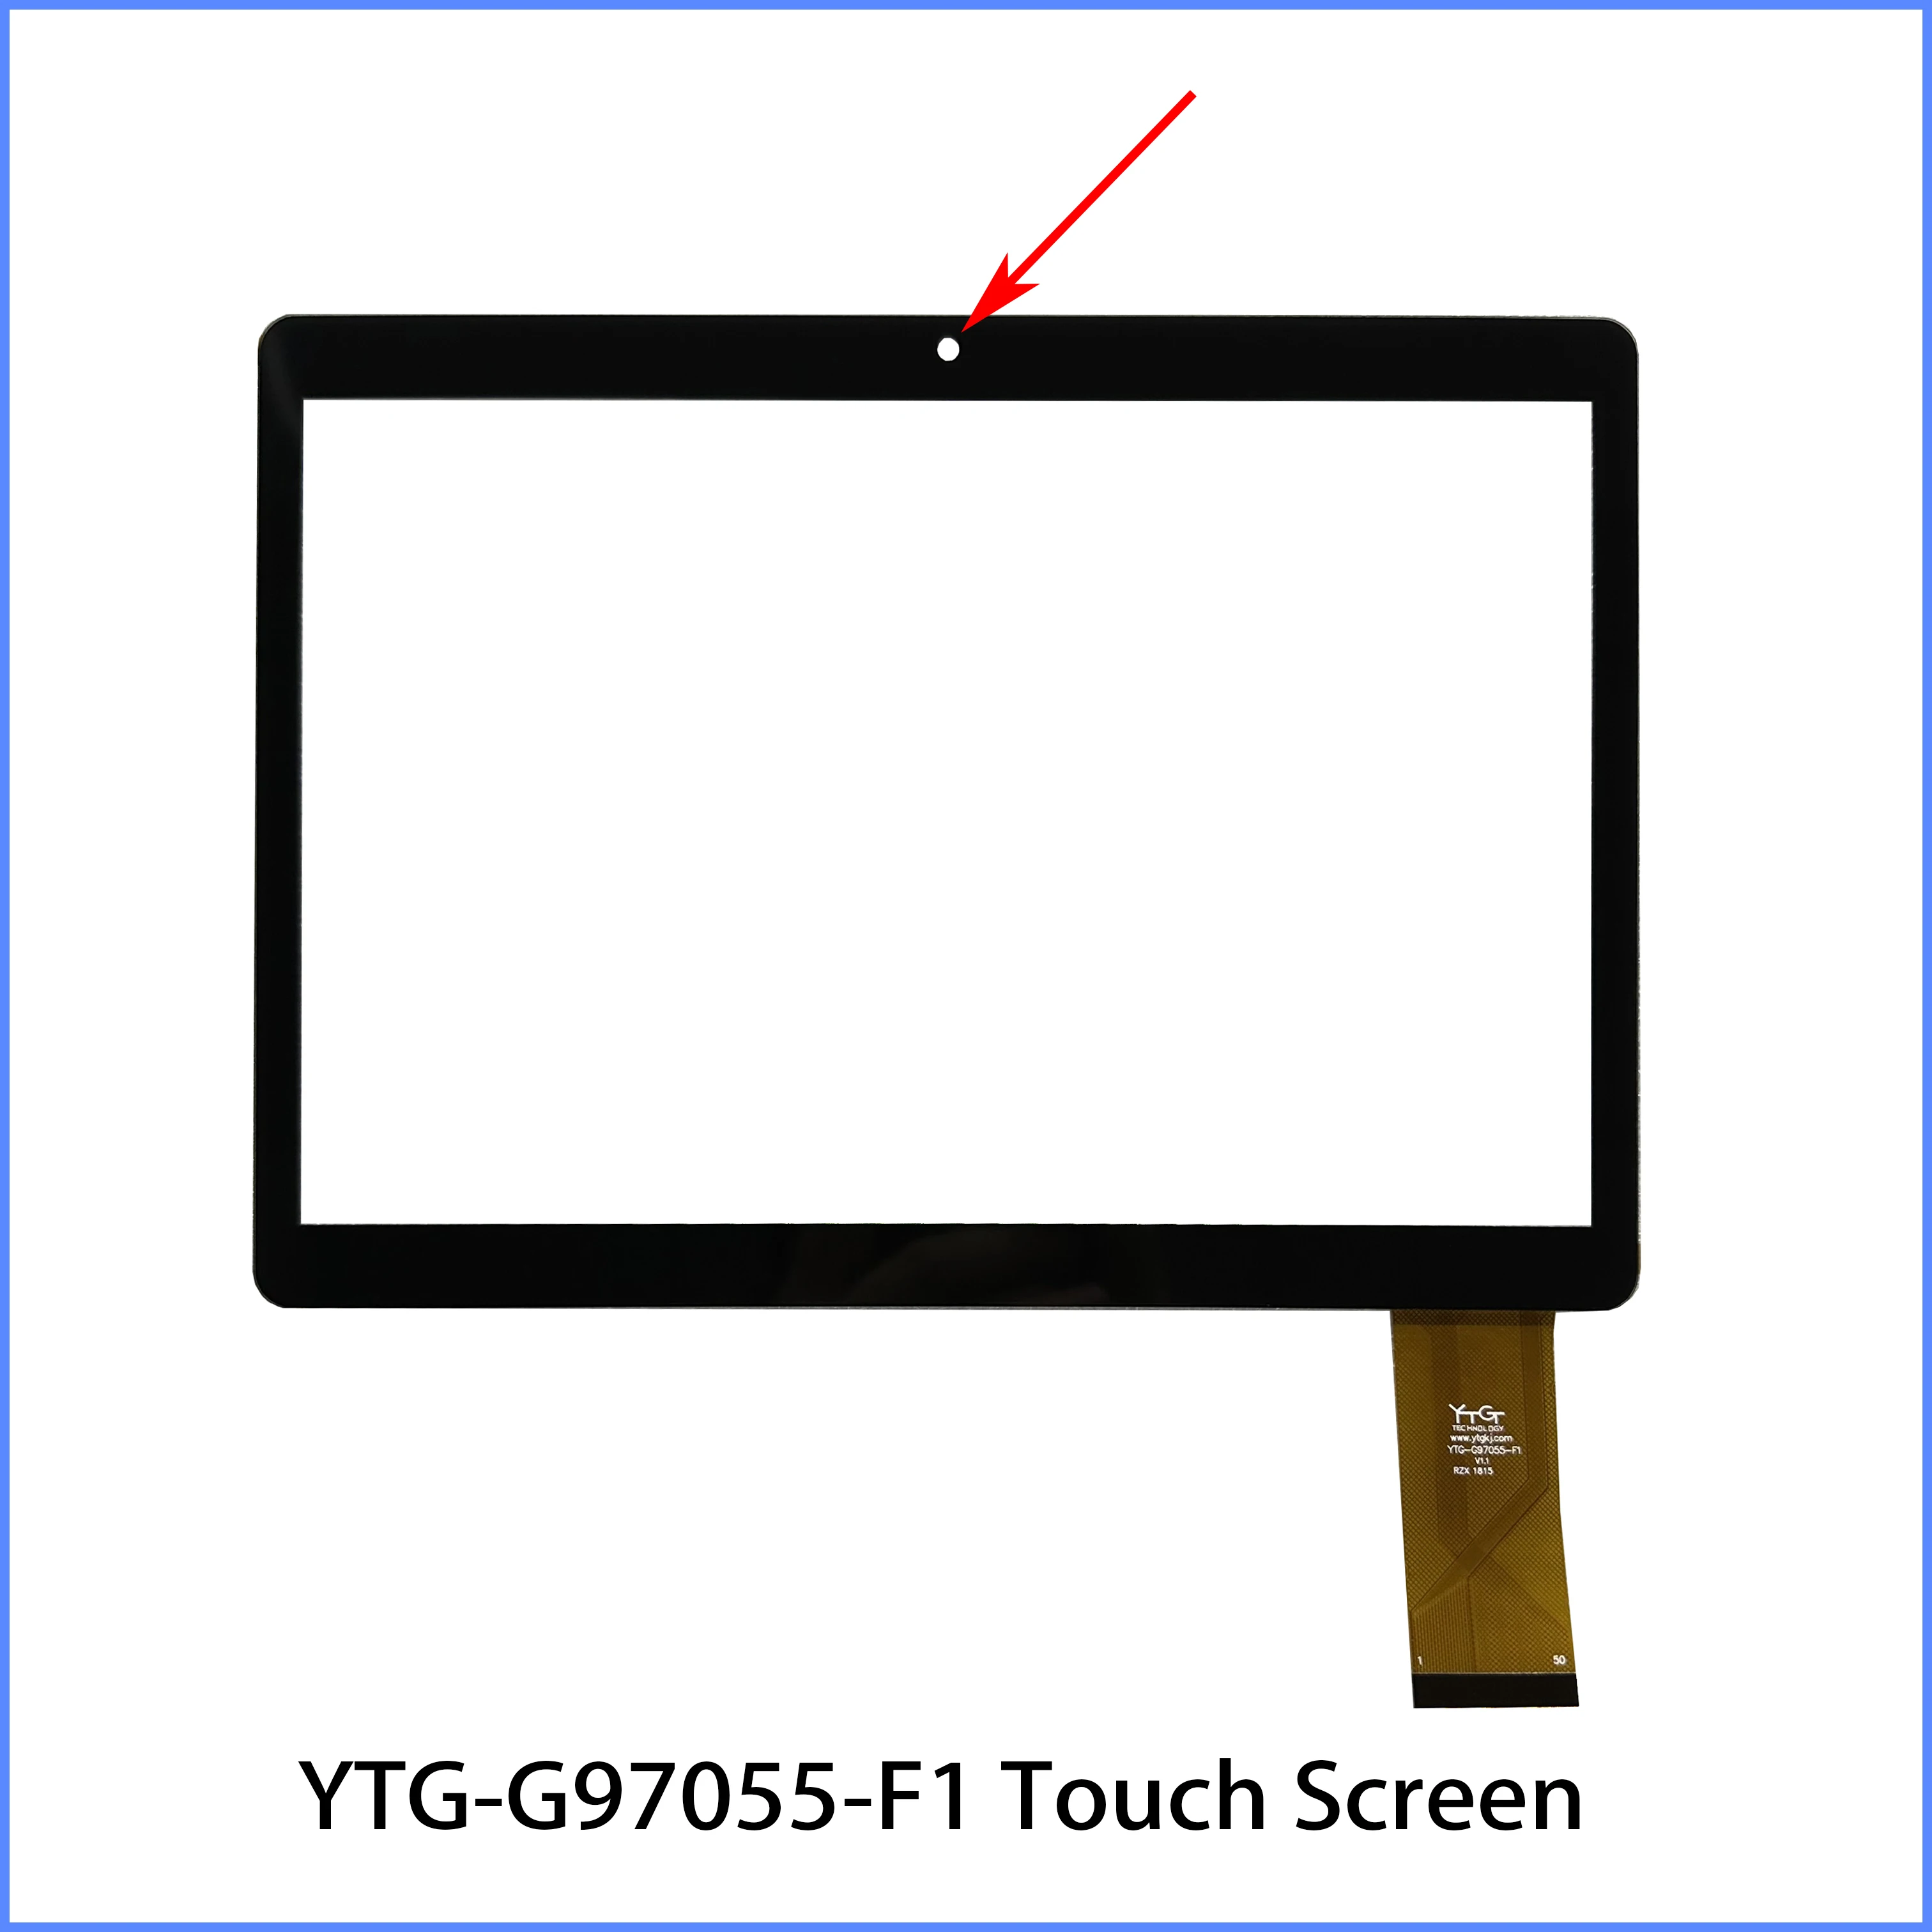 

Black New Touch Screen Digitizer For YTG-G97055-F1 V1.1 Tablet Touch Panel Sensor Replacement Free Shipping